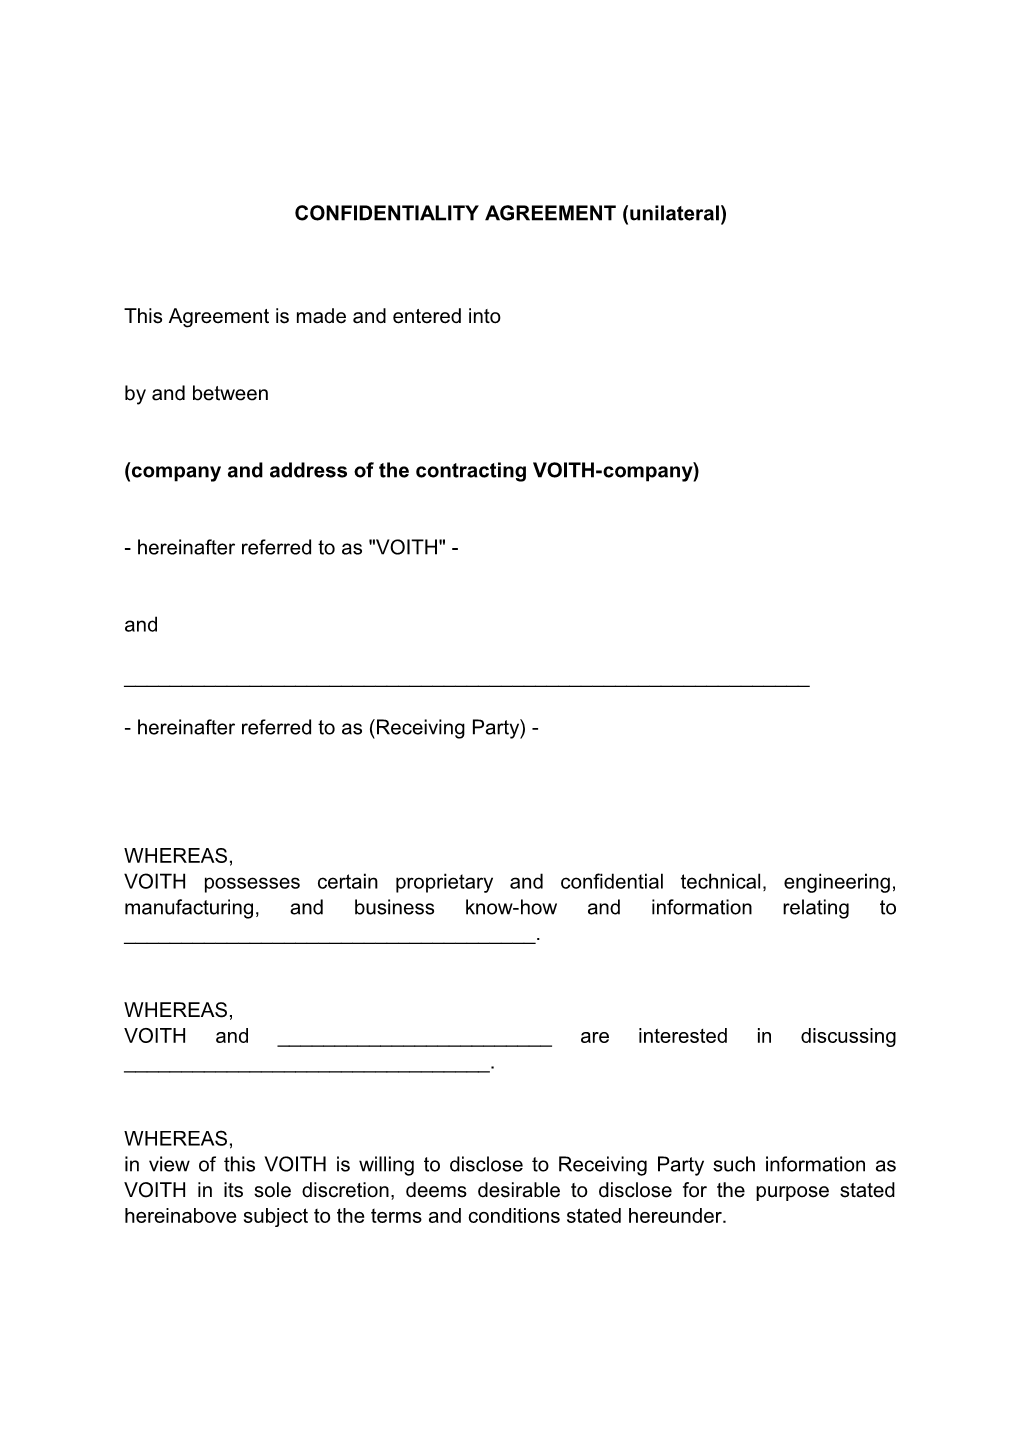 CONFIDENTIALITY AGREEMENT (Unilateral)